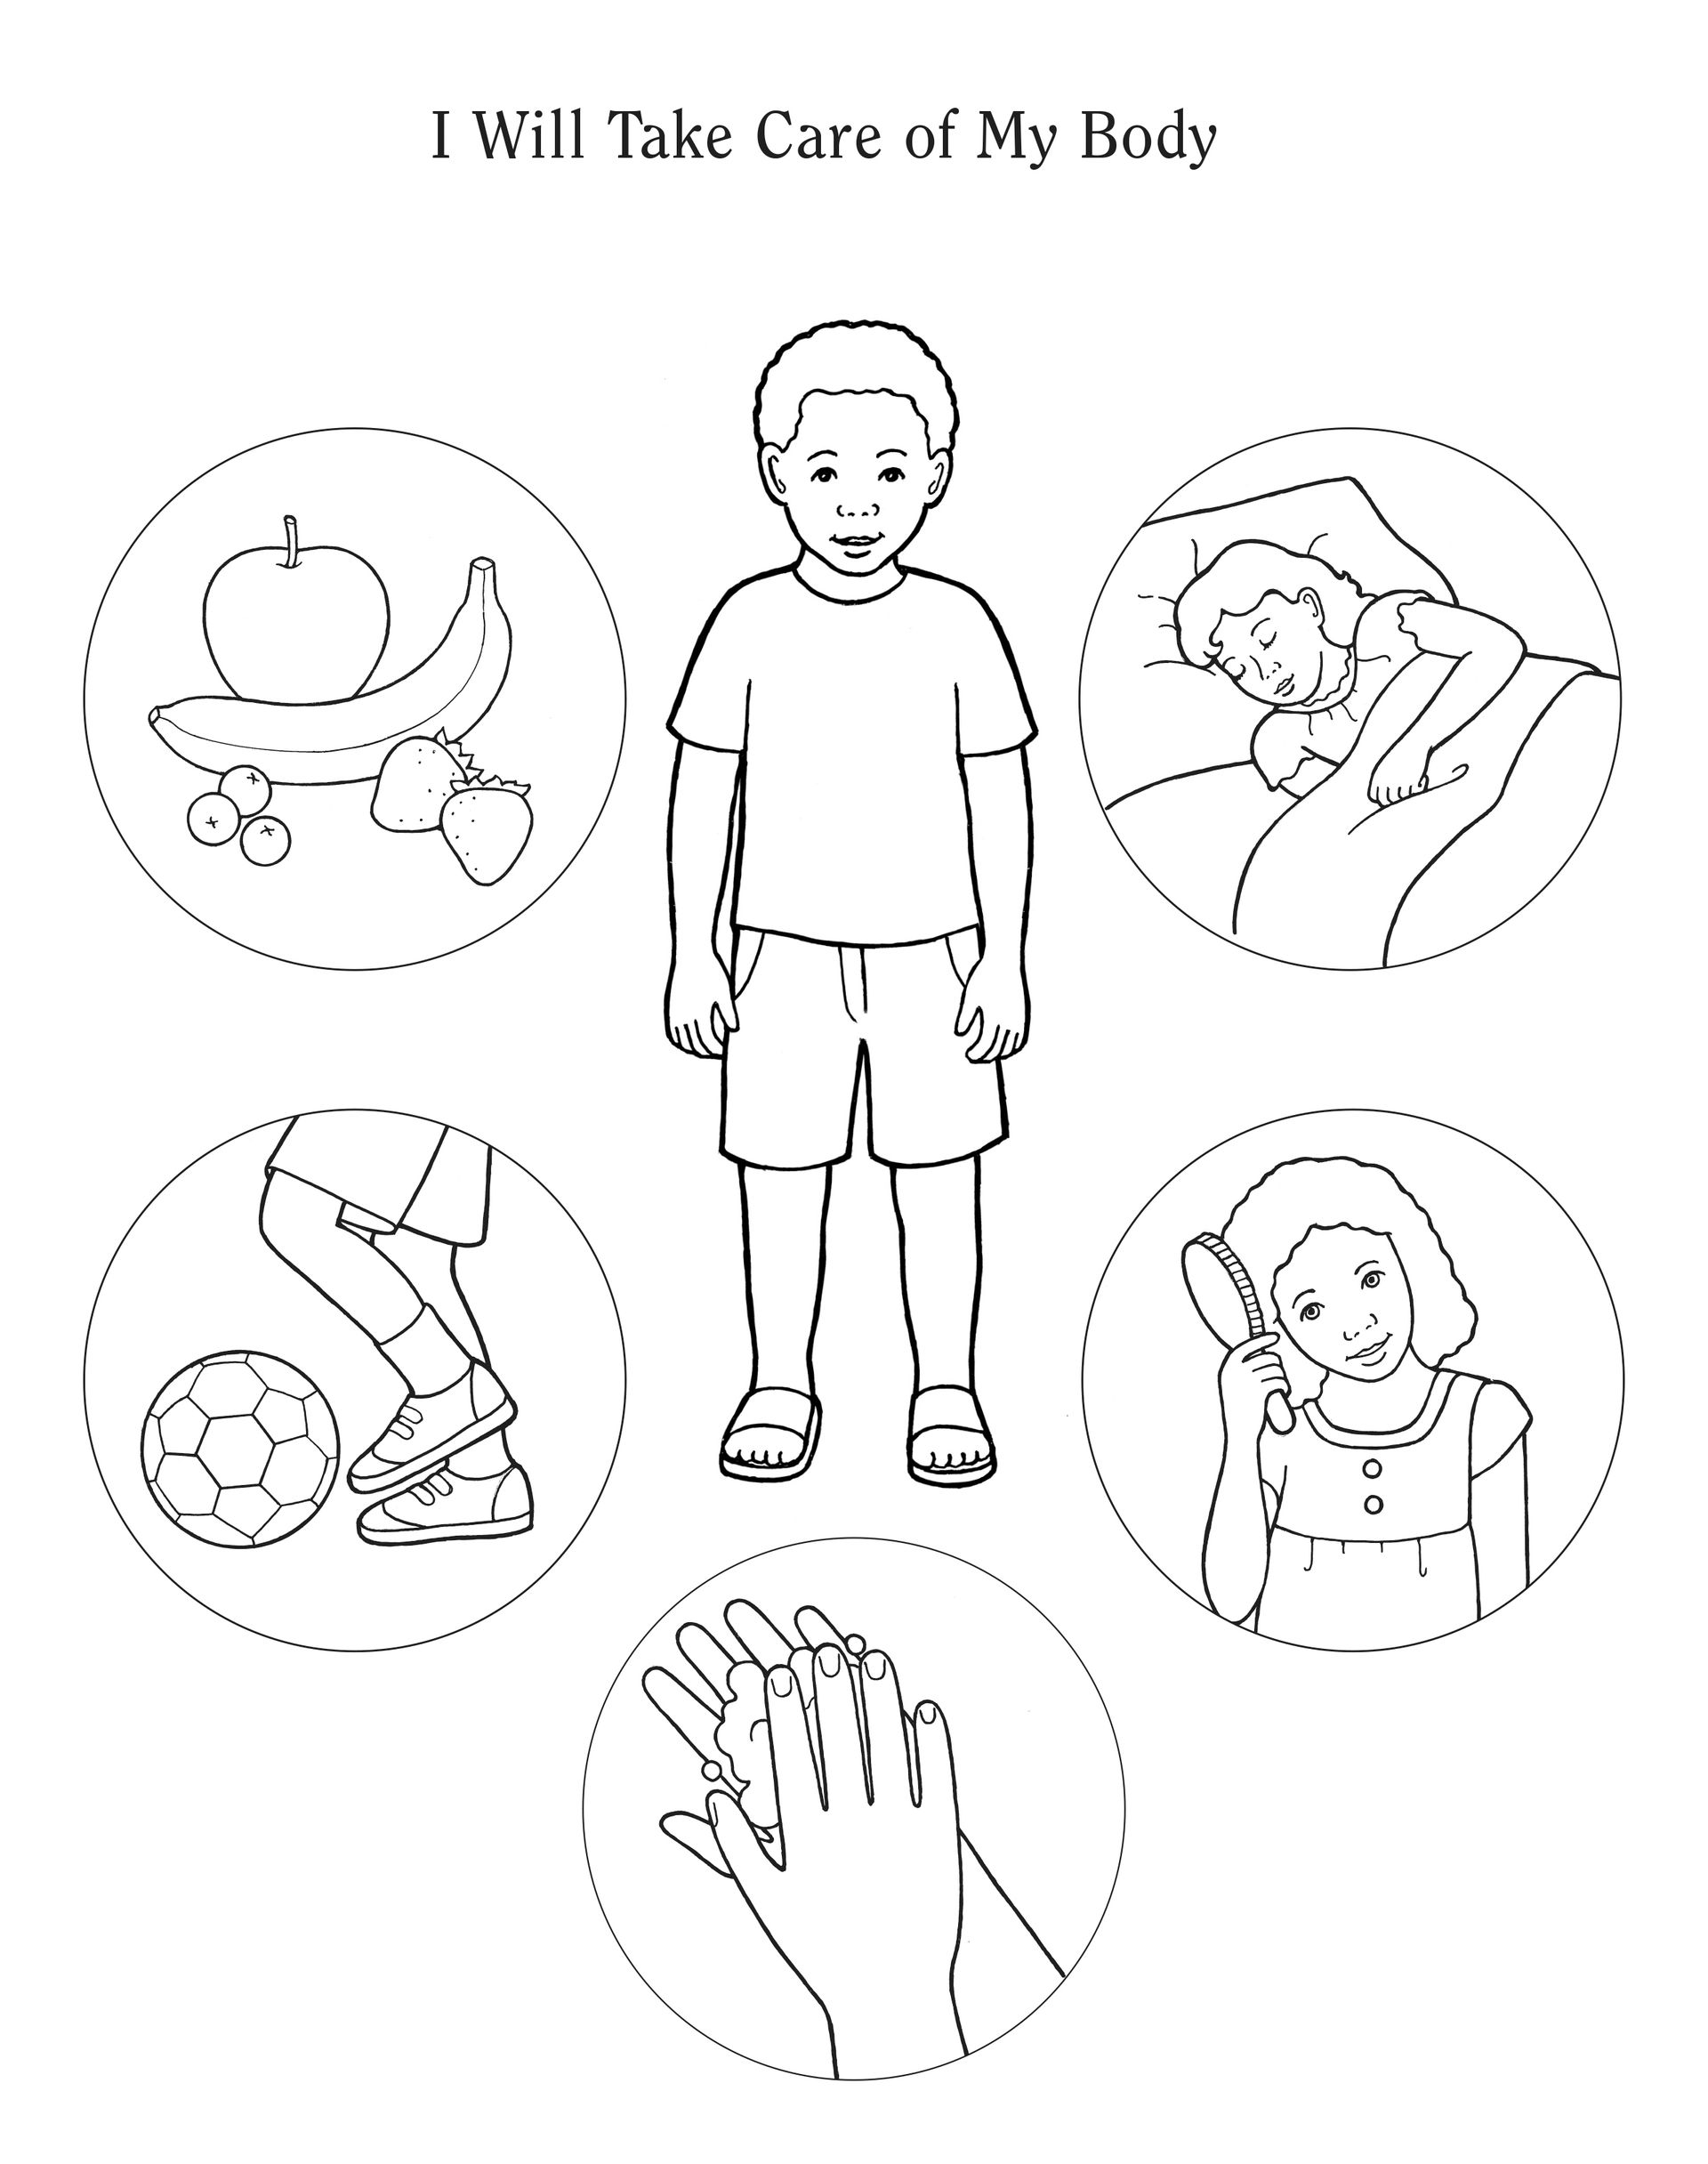 An illustration and activity from lesson 10, page 47 in the nursery manual Behold Your Little Ones (2008).